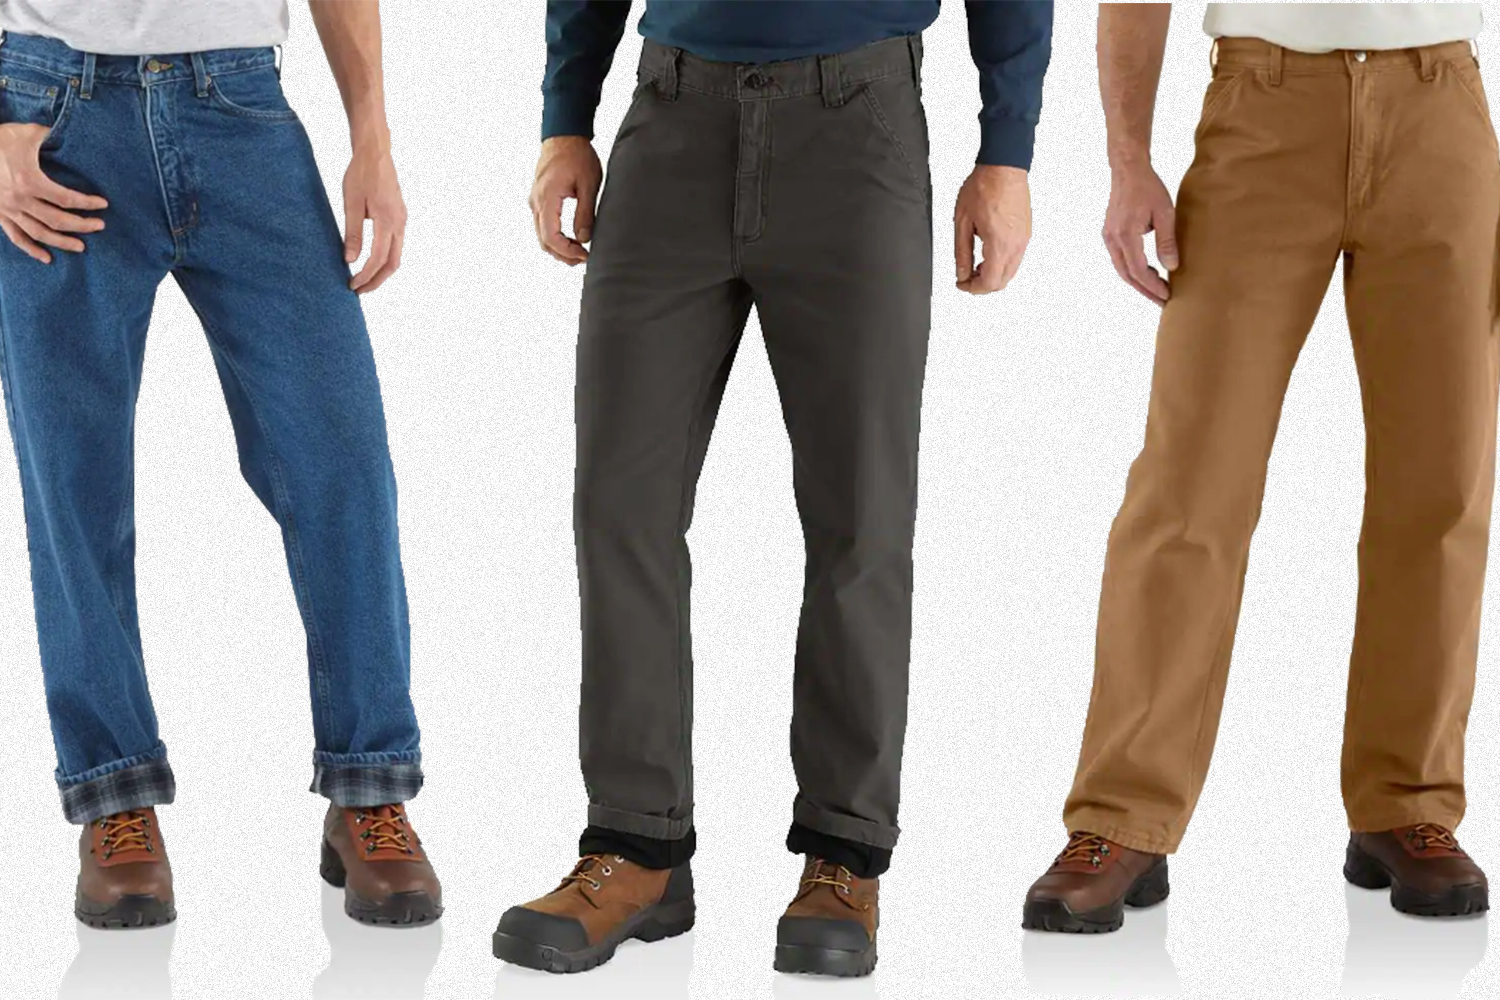 All Carhartt Flannel-Lined Men's Pants Are on Sale Today - InsideHook